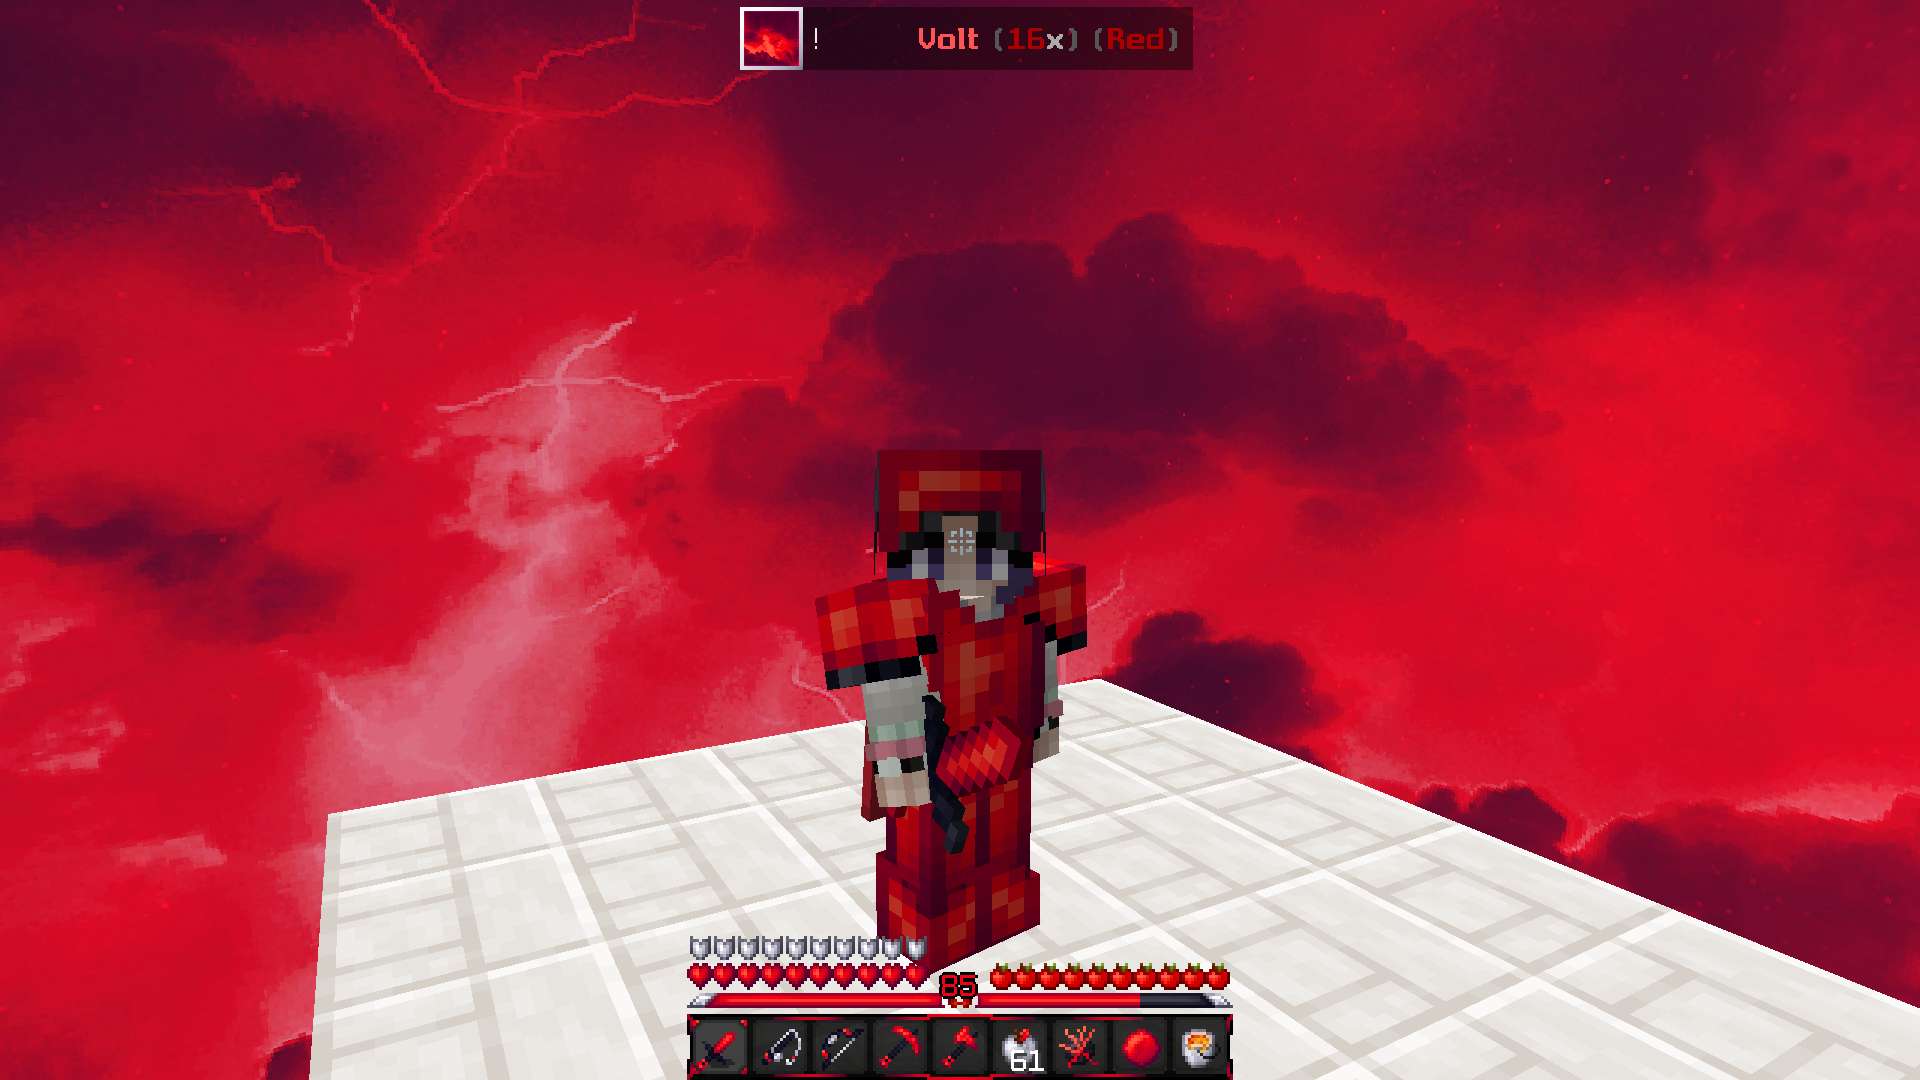 Volt (Red) 16x by Soul & Zoreez on PvPRP